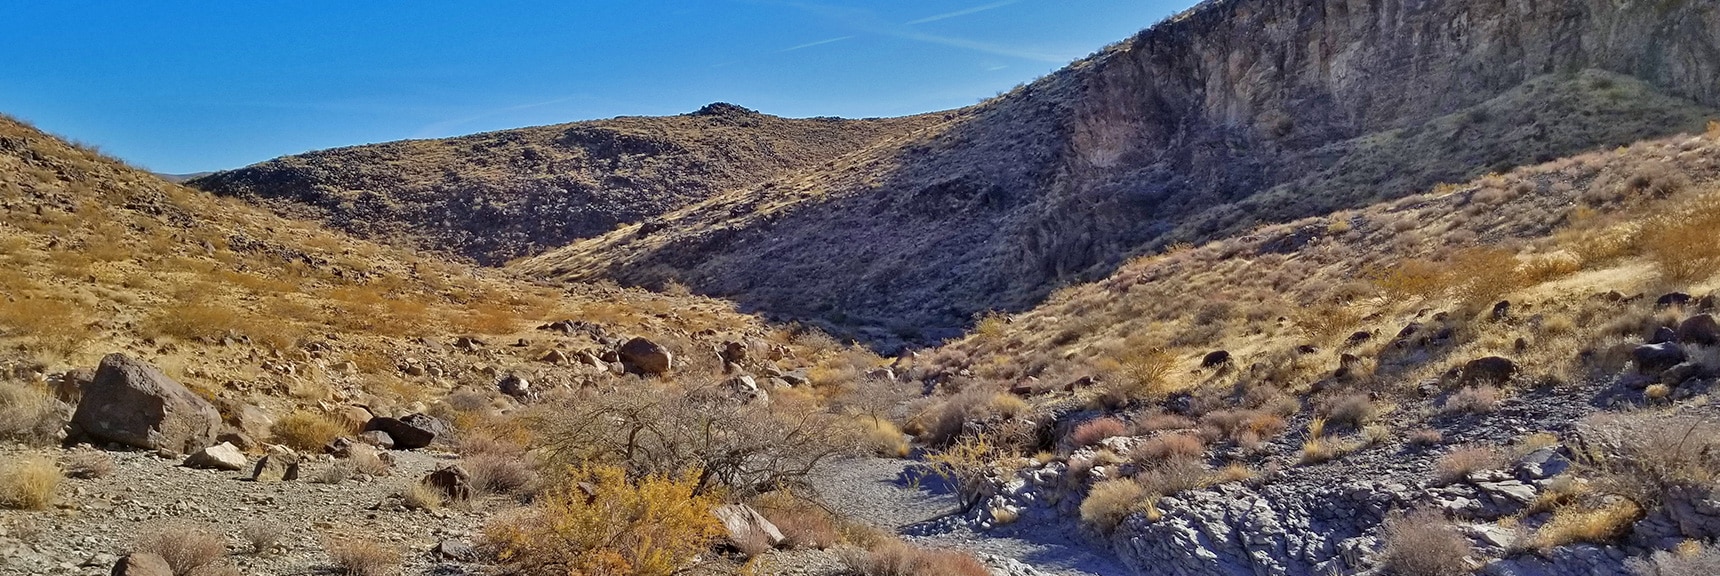 Heading Back for Closer Look at Petroglyph Gallery. | Petroglyph Canyon | Sloan Canyon National Conservation Area, Nevada